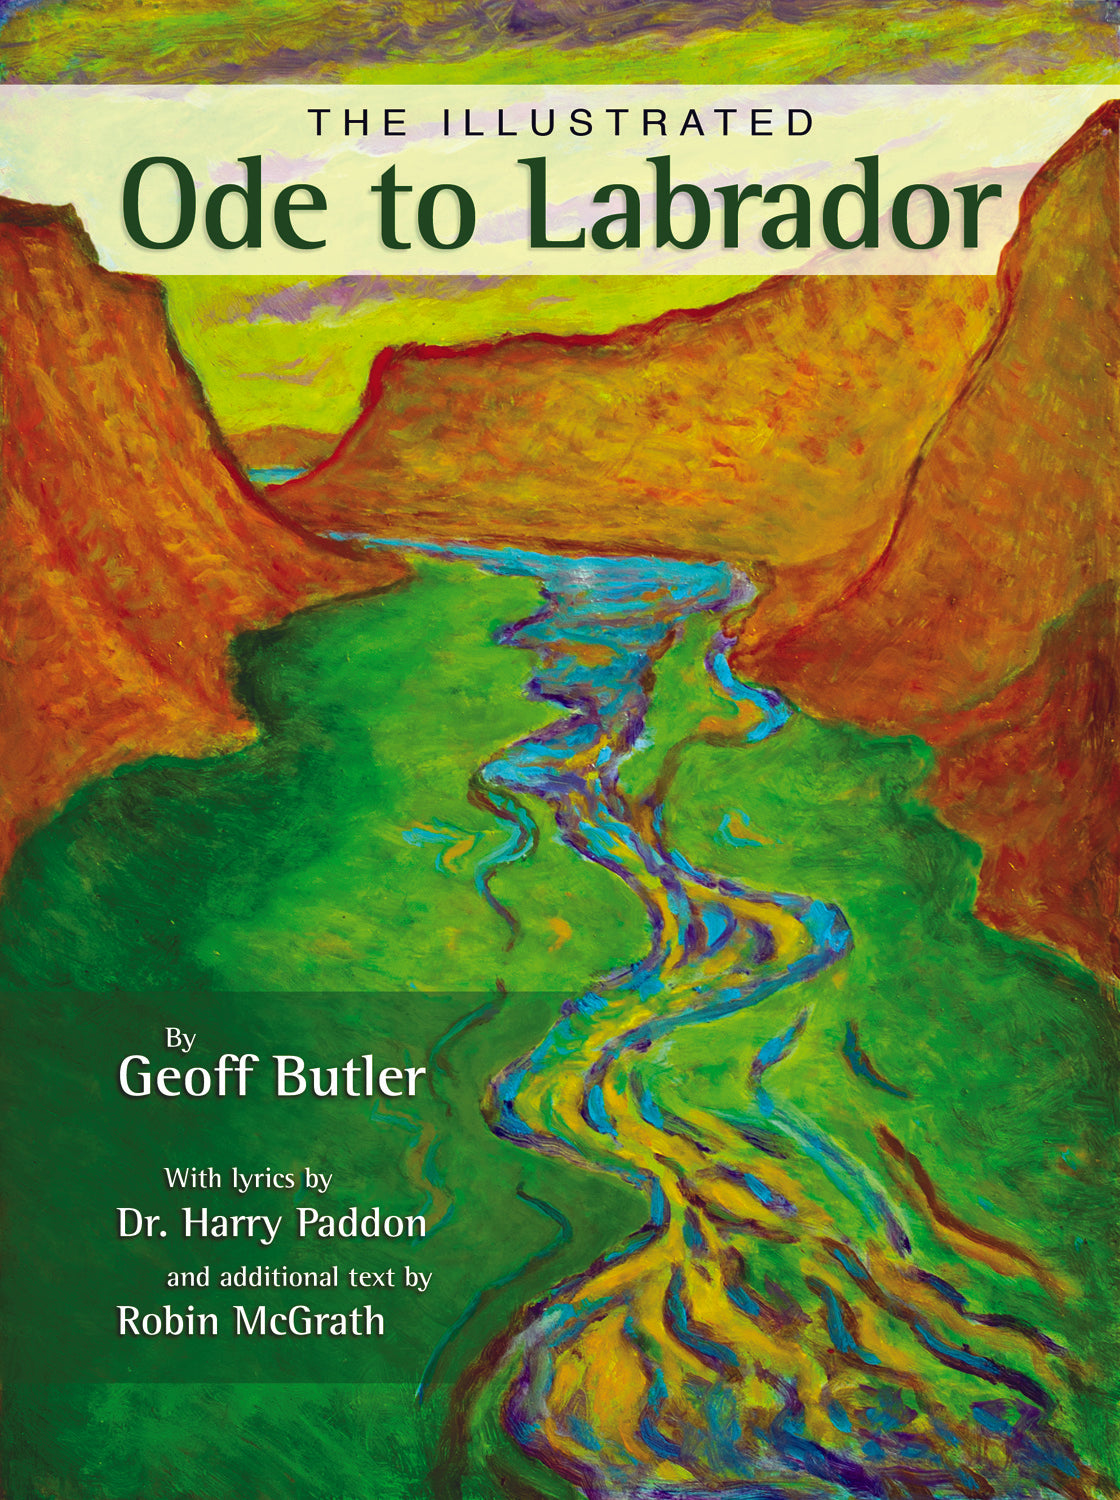 Illustrated Ode to Labrador, The